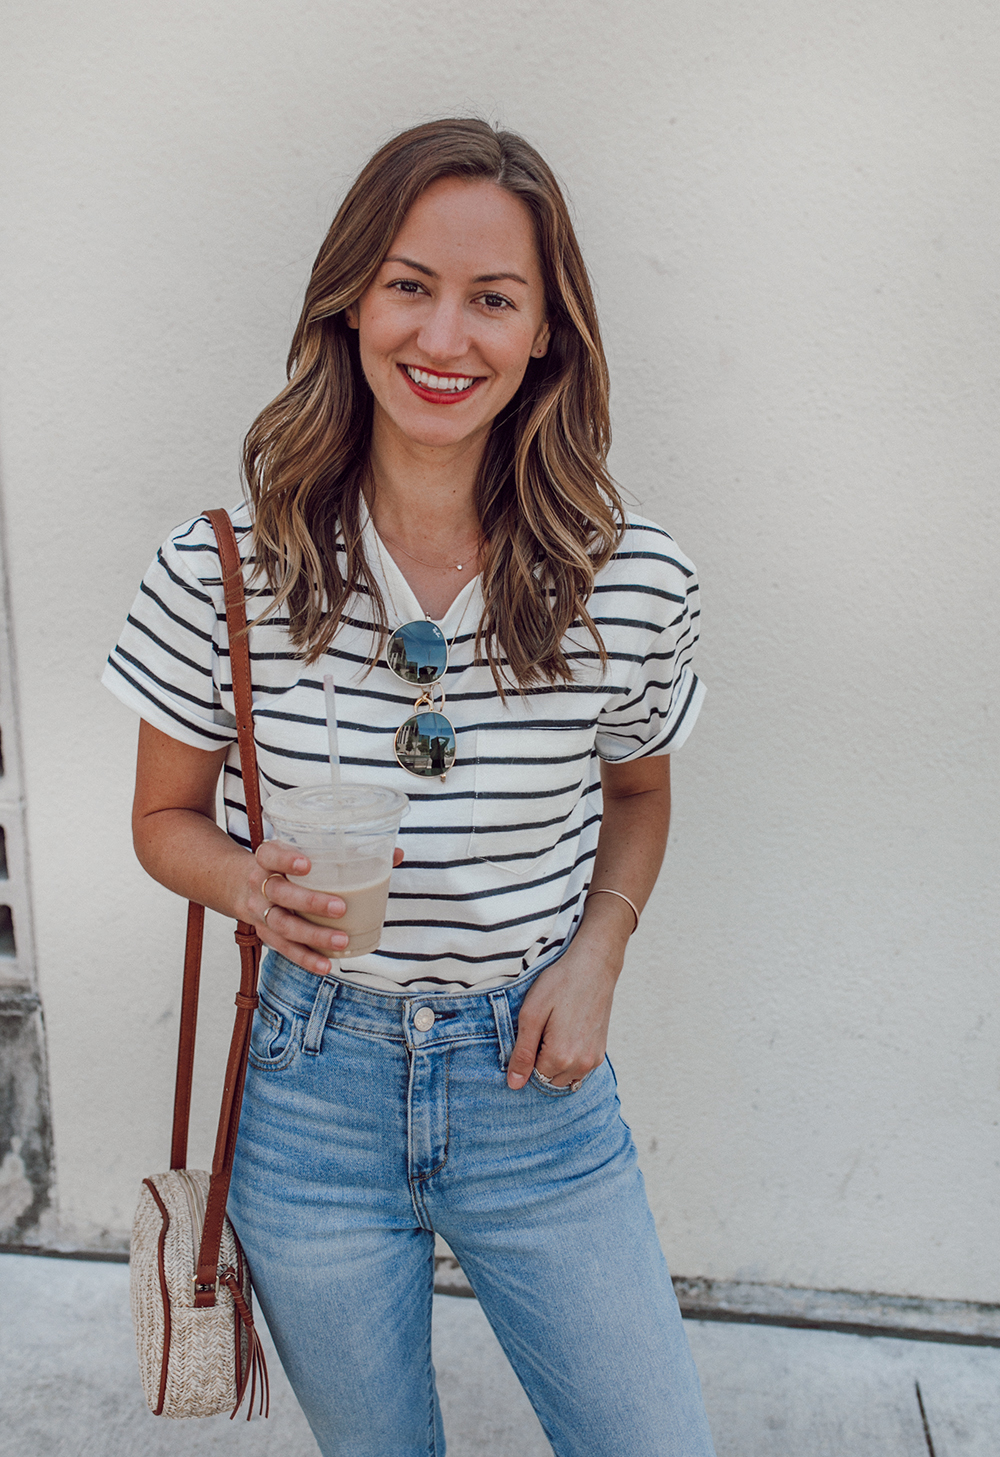 livvyland-blog-olivia-watson-sole-society-red-sandal-flats-spring-summer-outfit-idea-style-austin-texas-fashion-blogger-striped-shirt-1